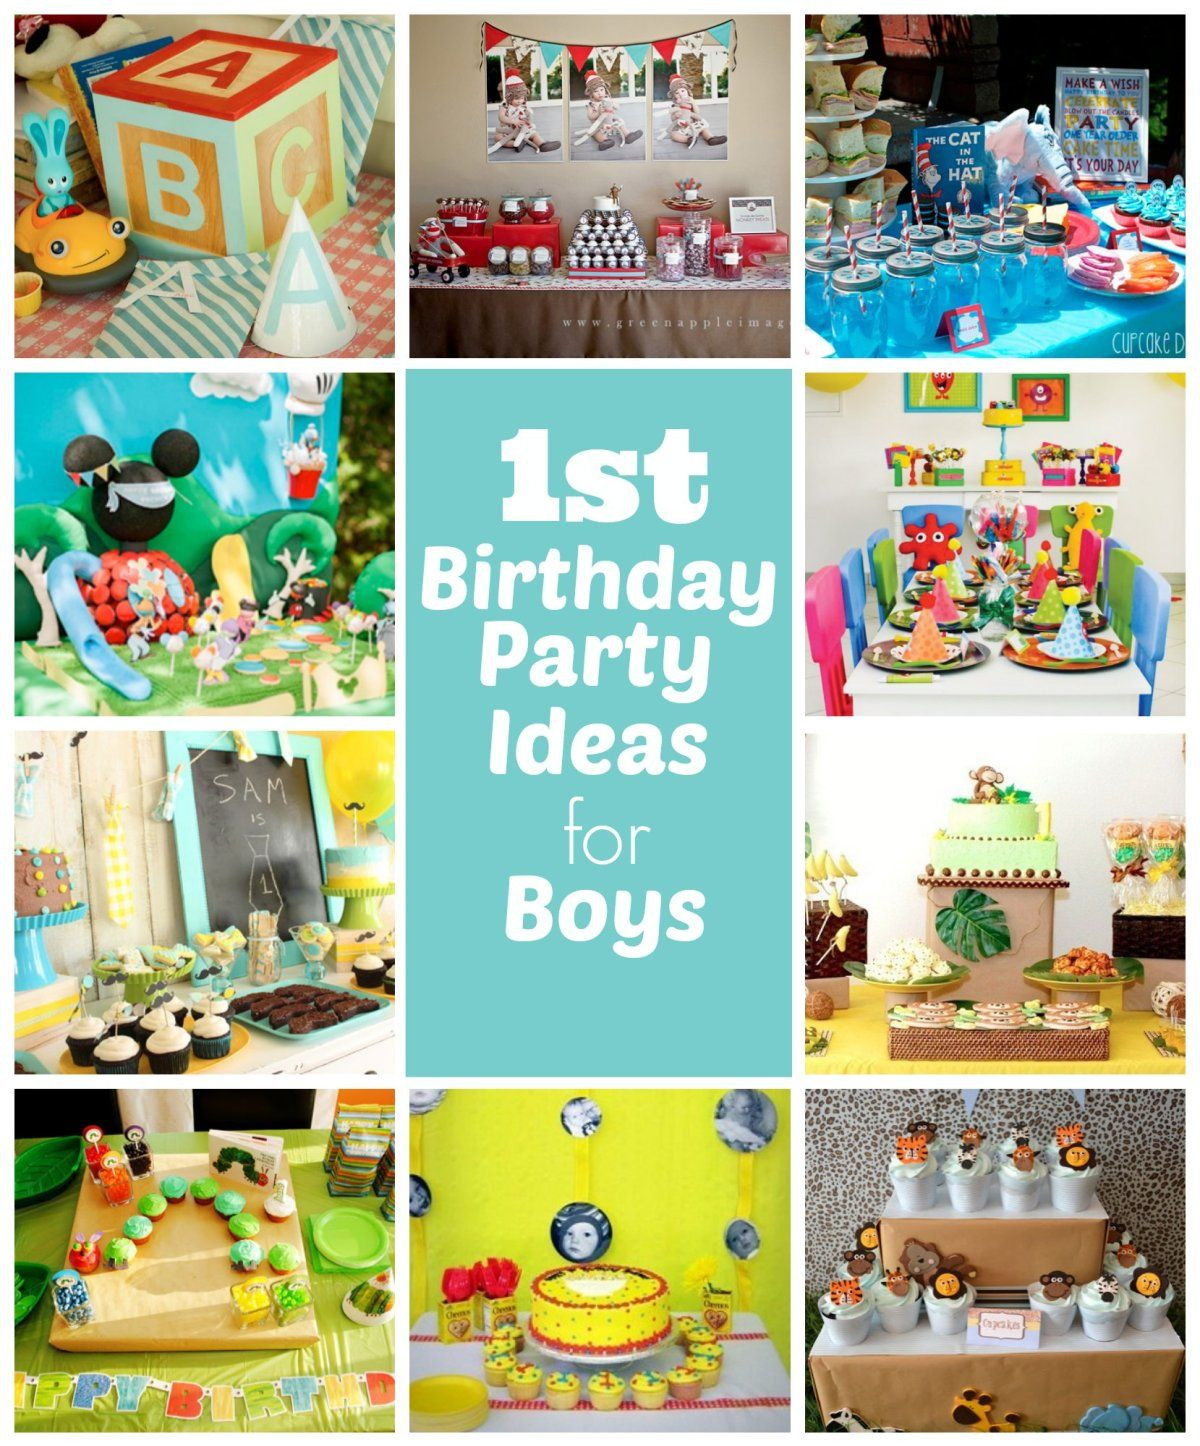 Baby Boys 1St Birthday Party Supplies
 1st Birthday Party Ideas for Boys Kids